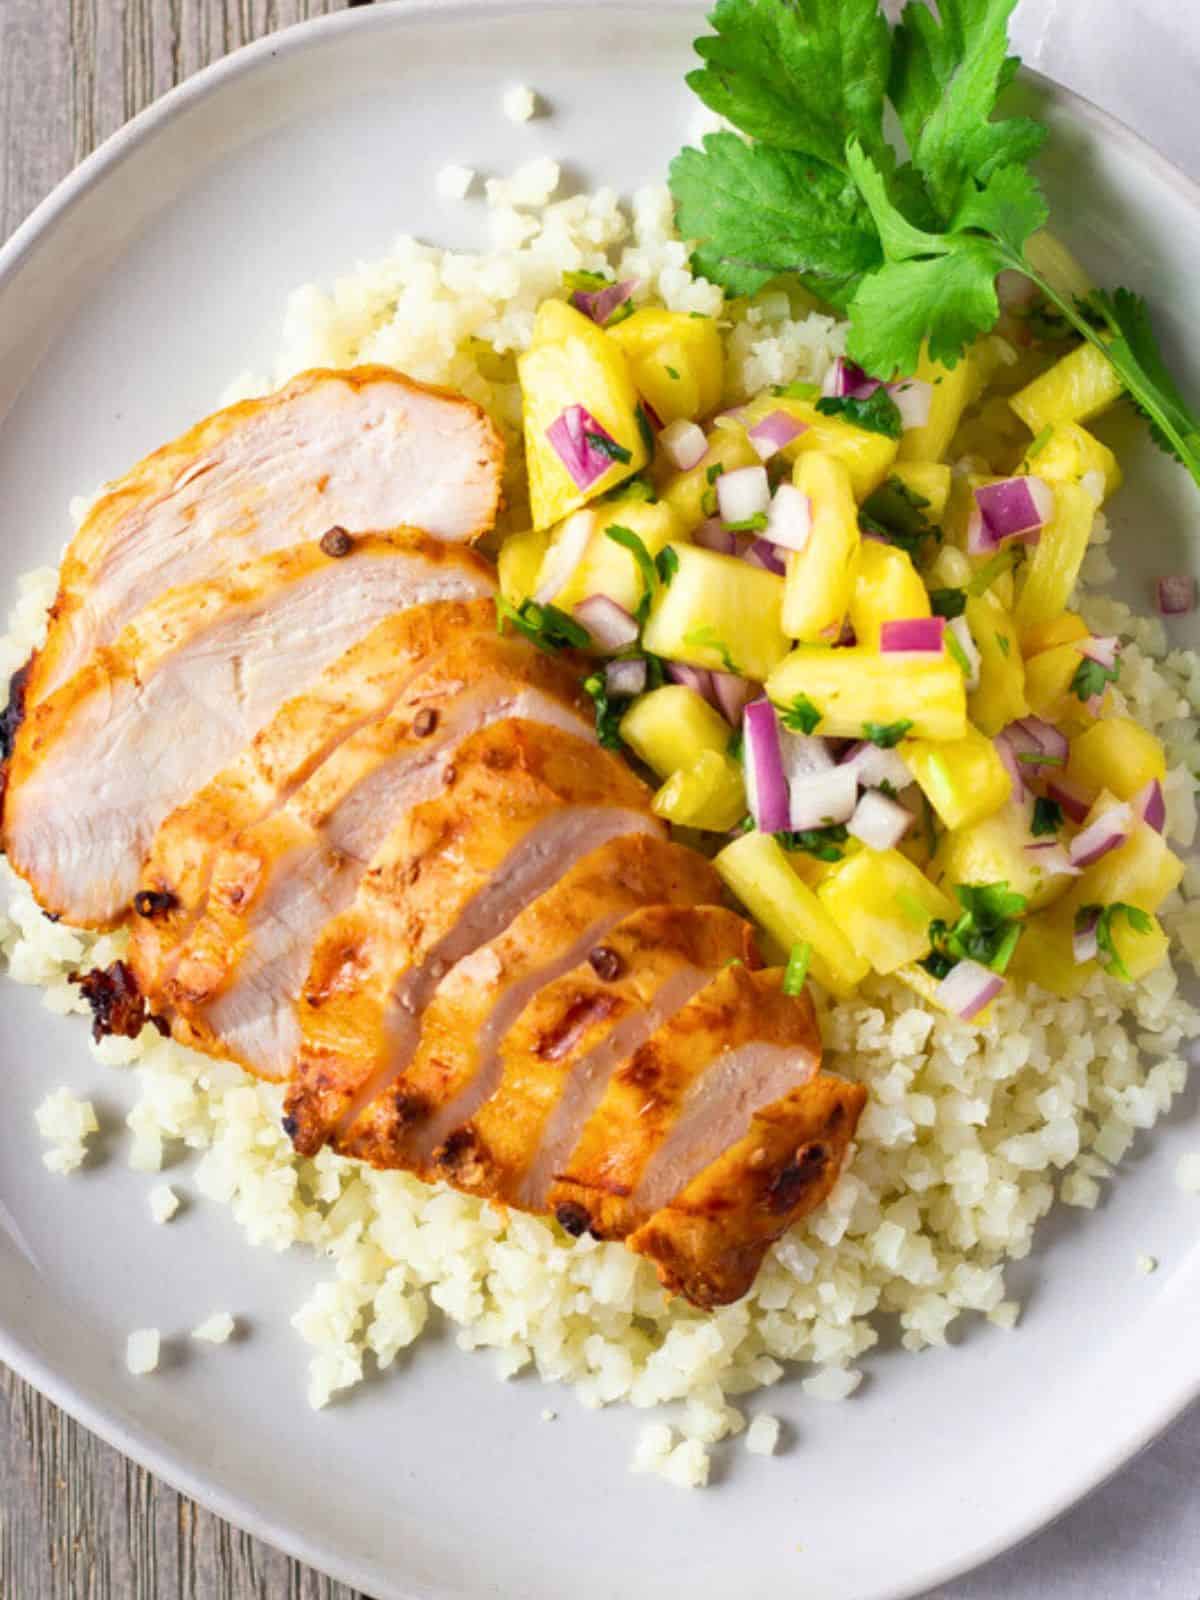 Sliced chicken on a plate with cauliflower rice and pineapple salsa.